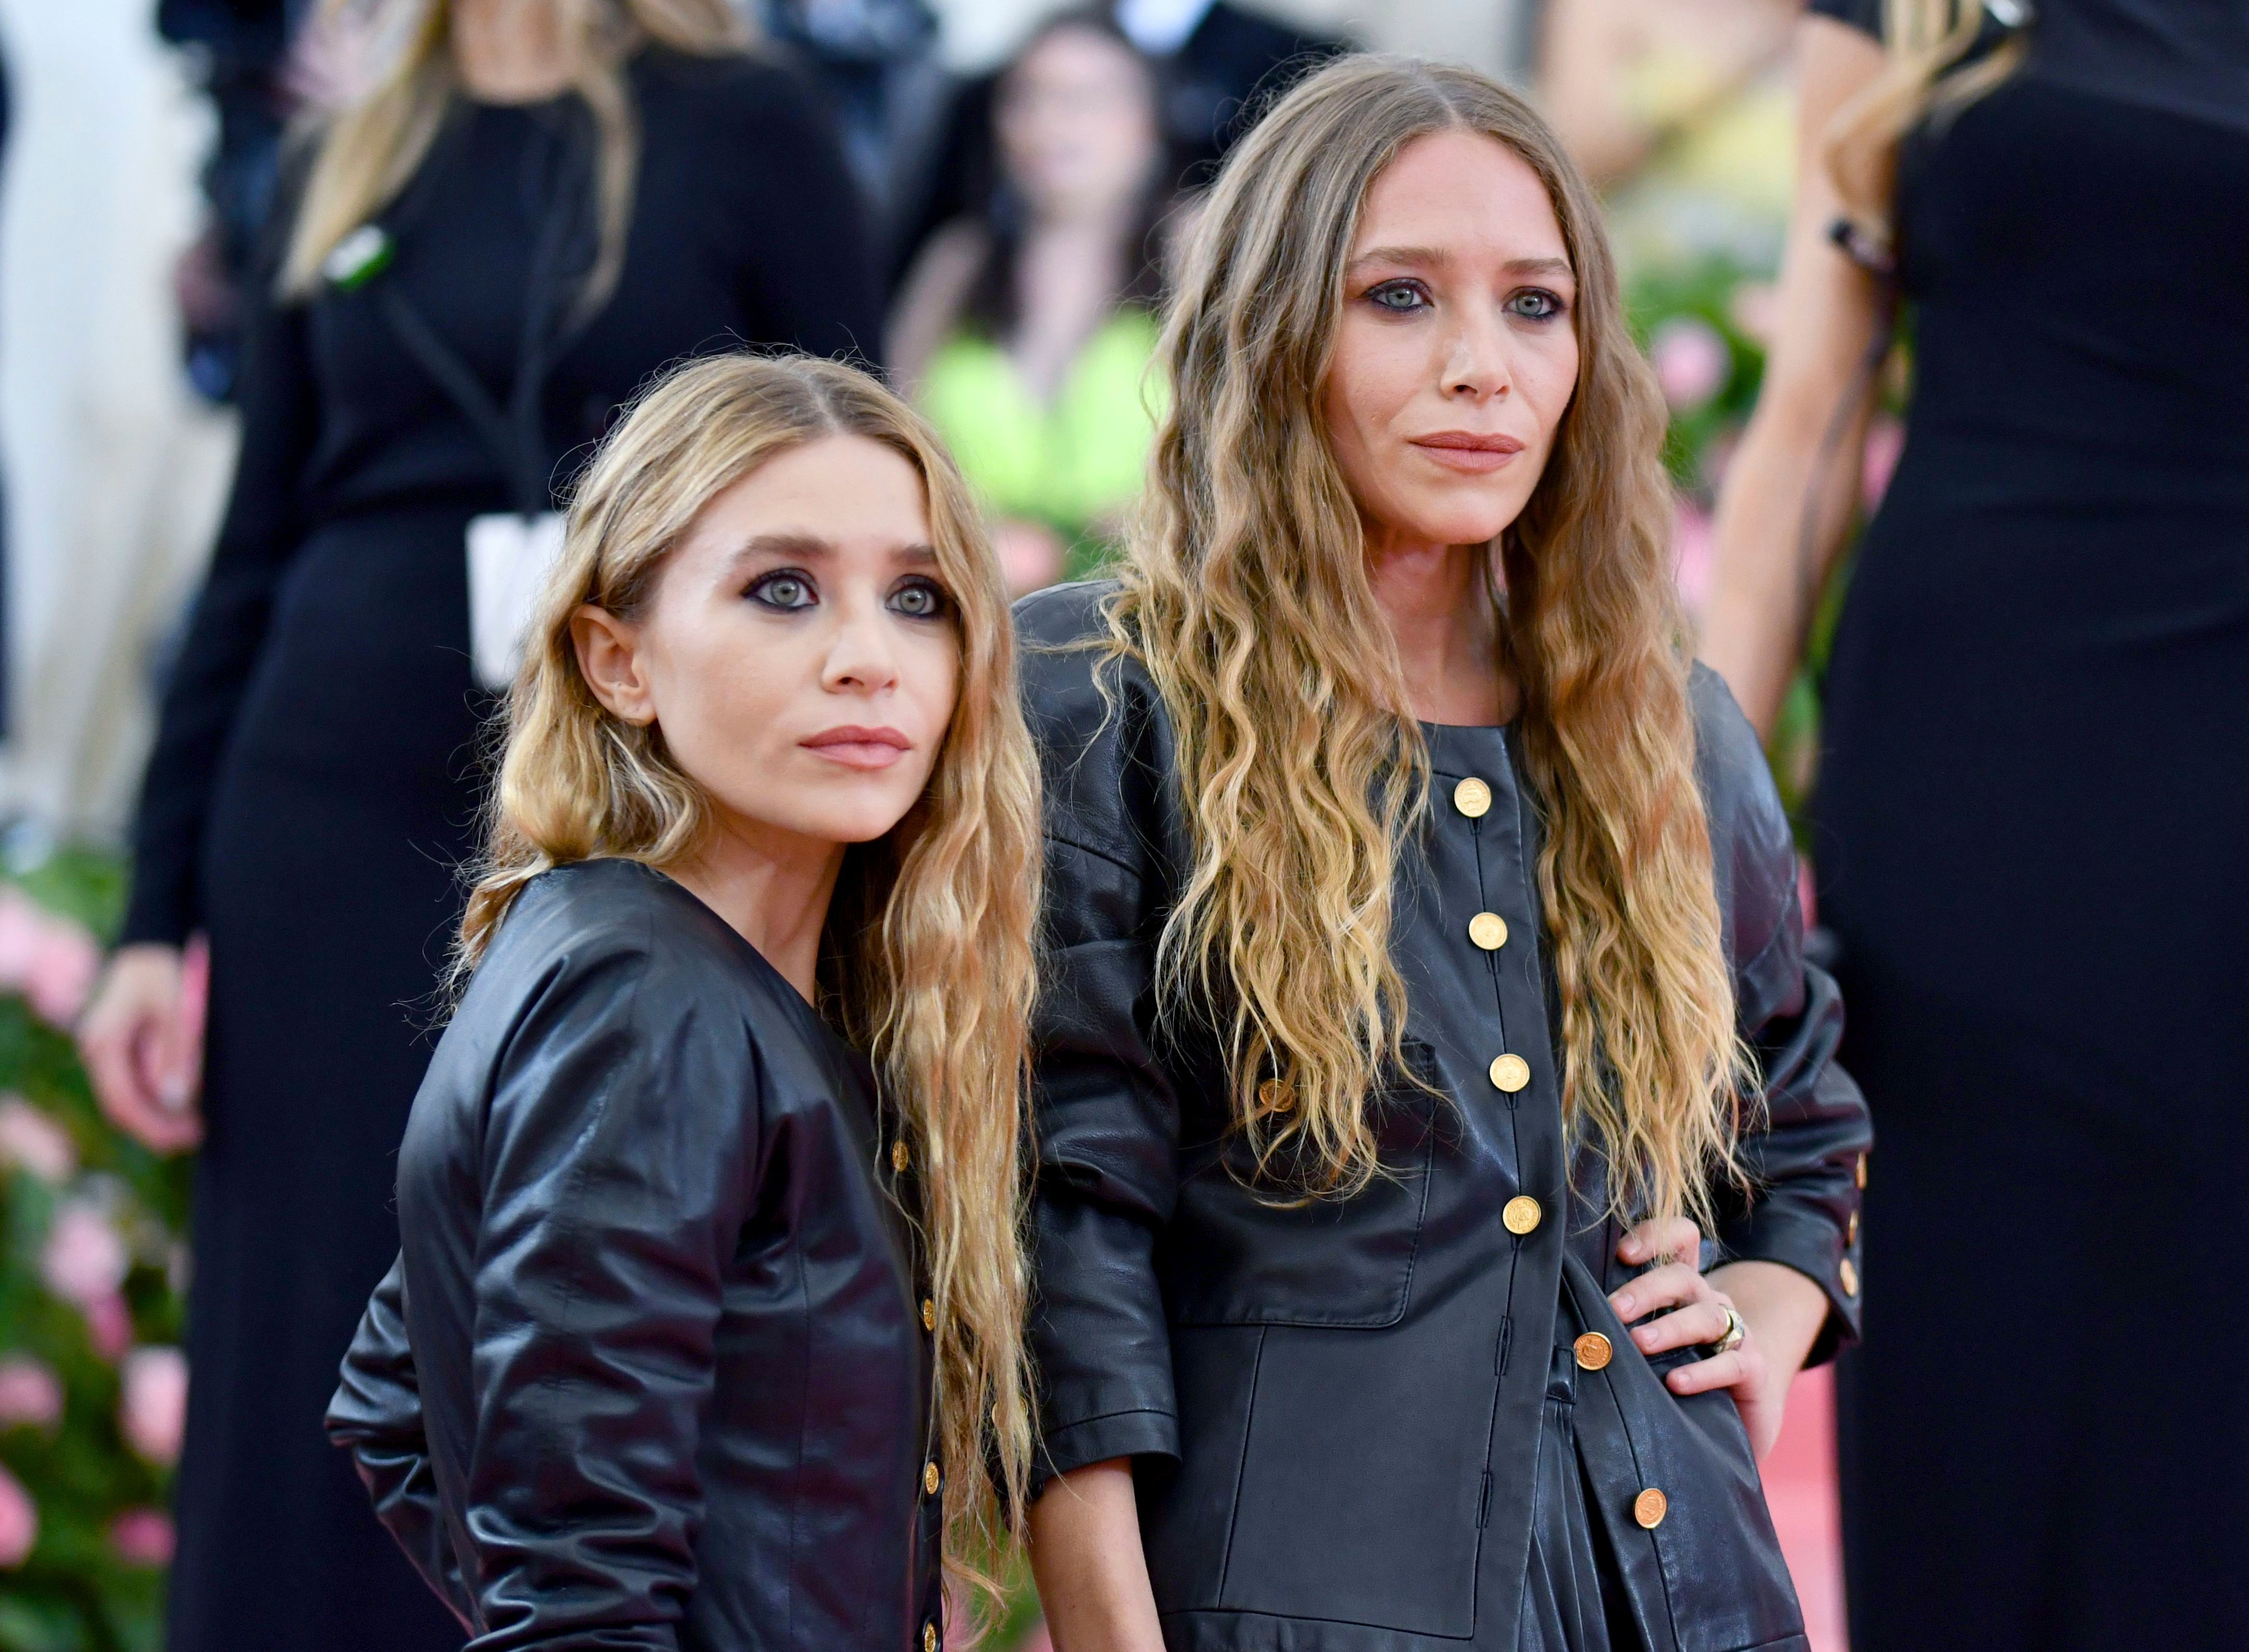 Twins: Weird, Odd Moments From Mary-Kate and Ashley